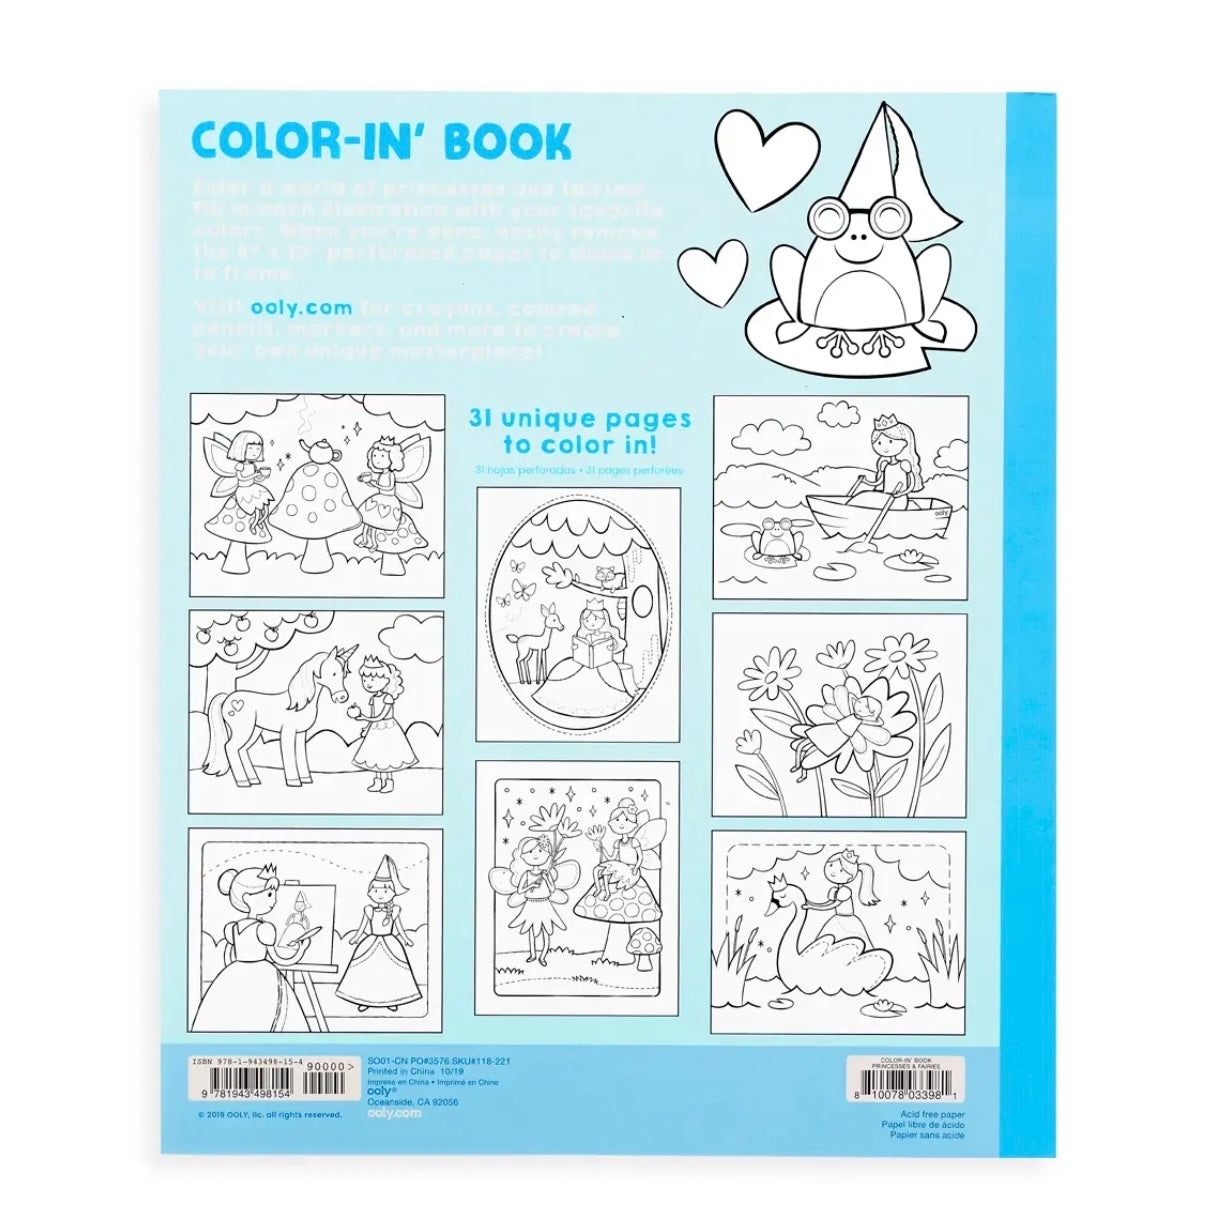 Color-in' Book